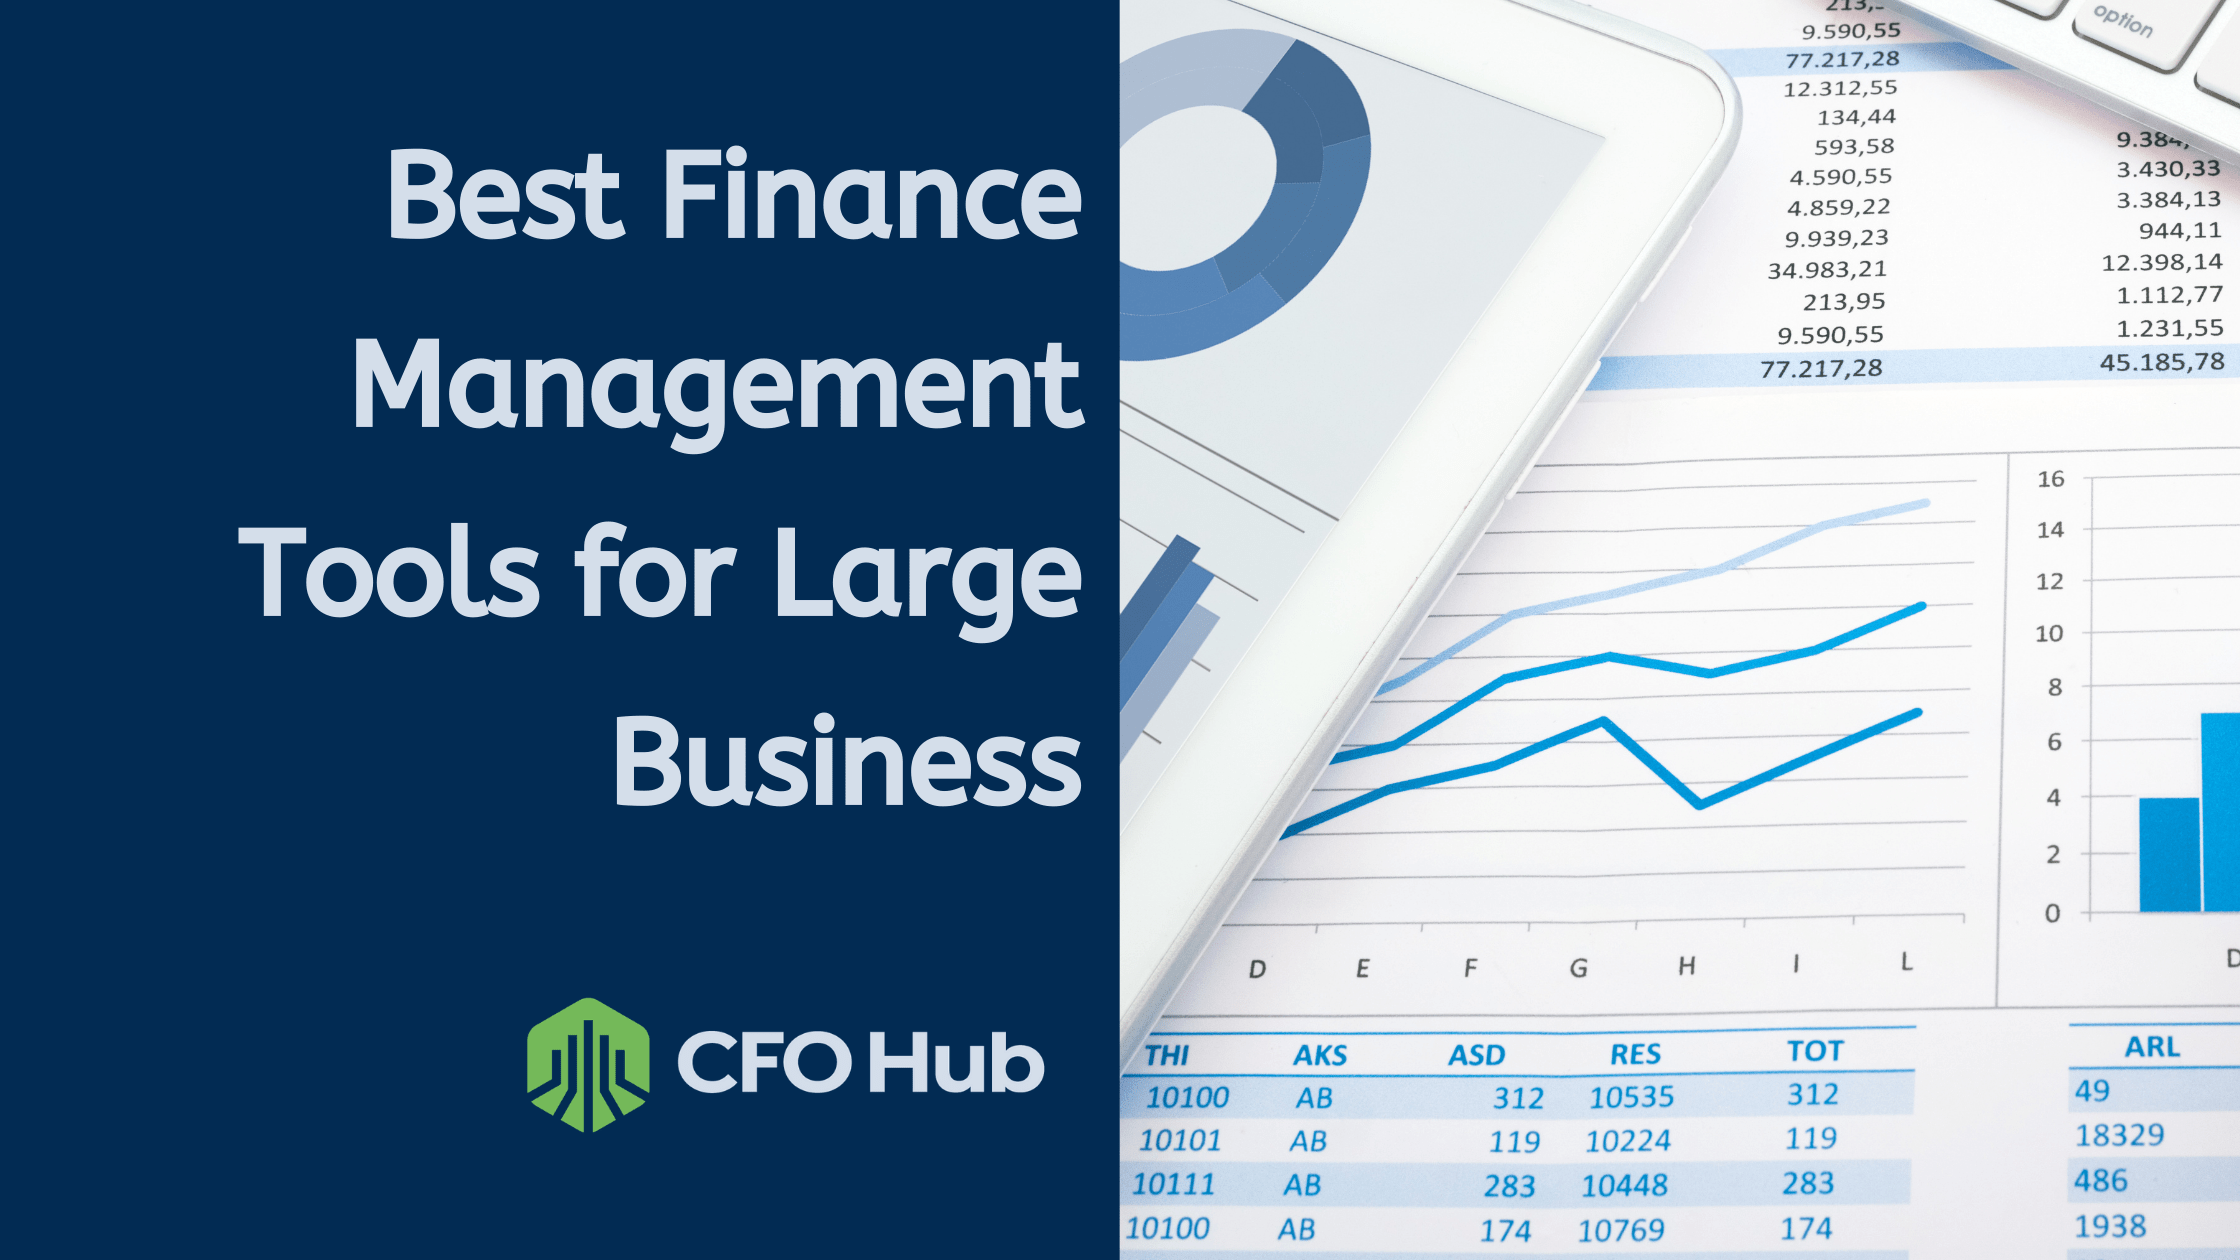 Best Finance Management Tools for Large Business